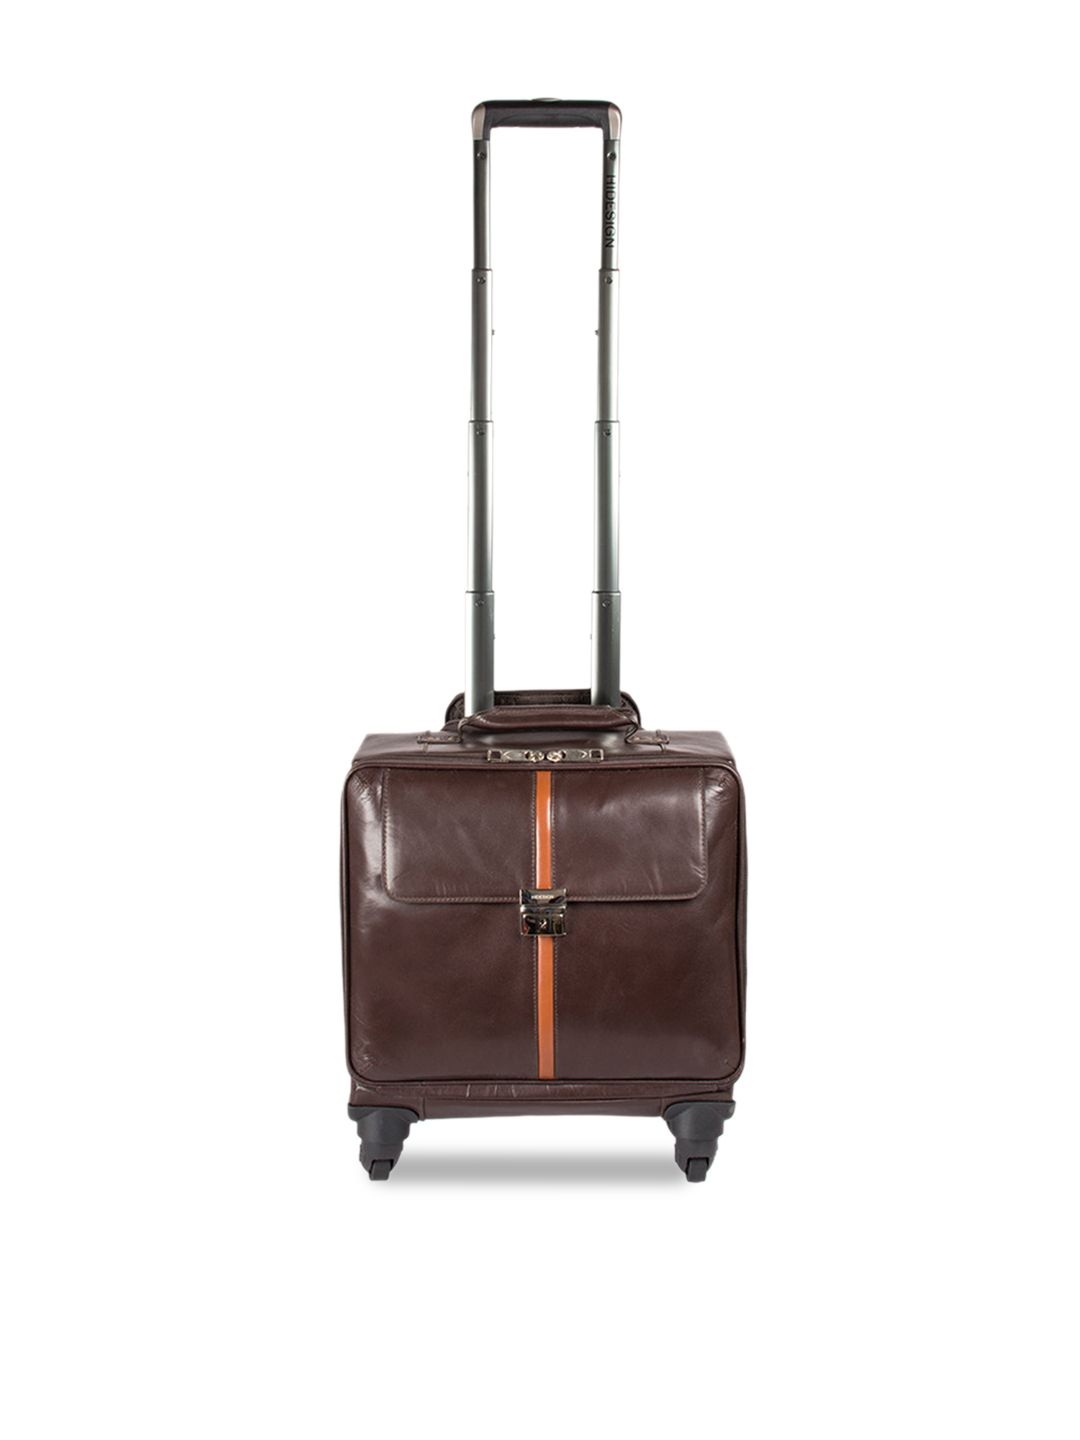 Hidesign Brown Solid Cabin Trolley Suitcase Price in India